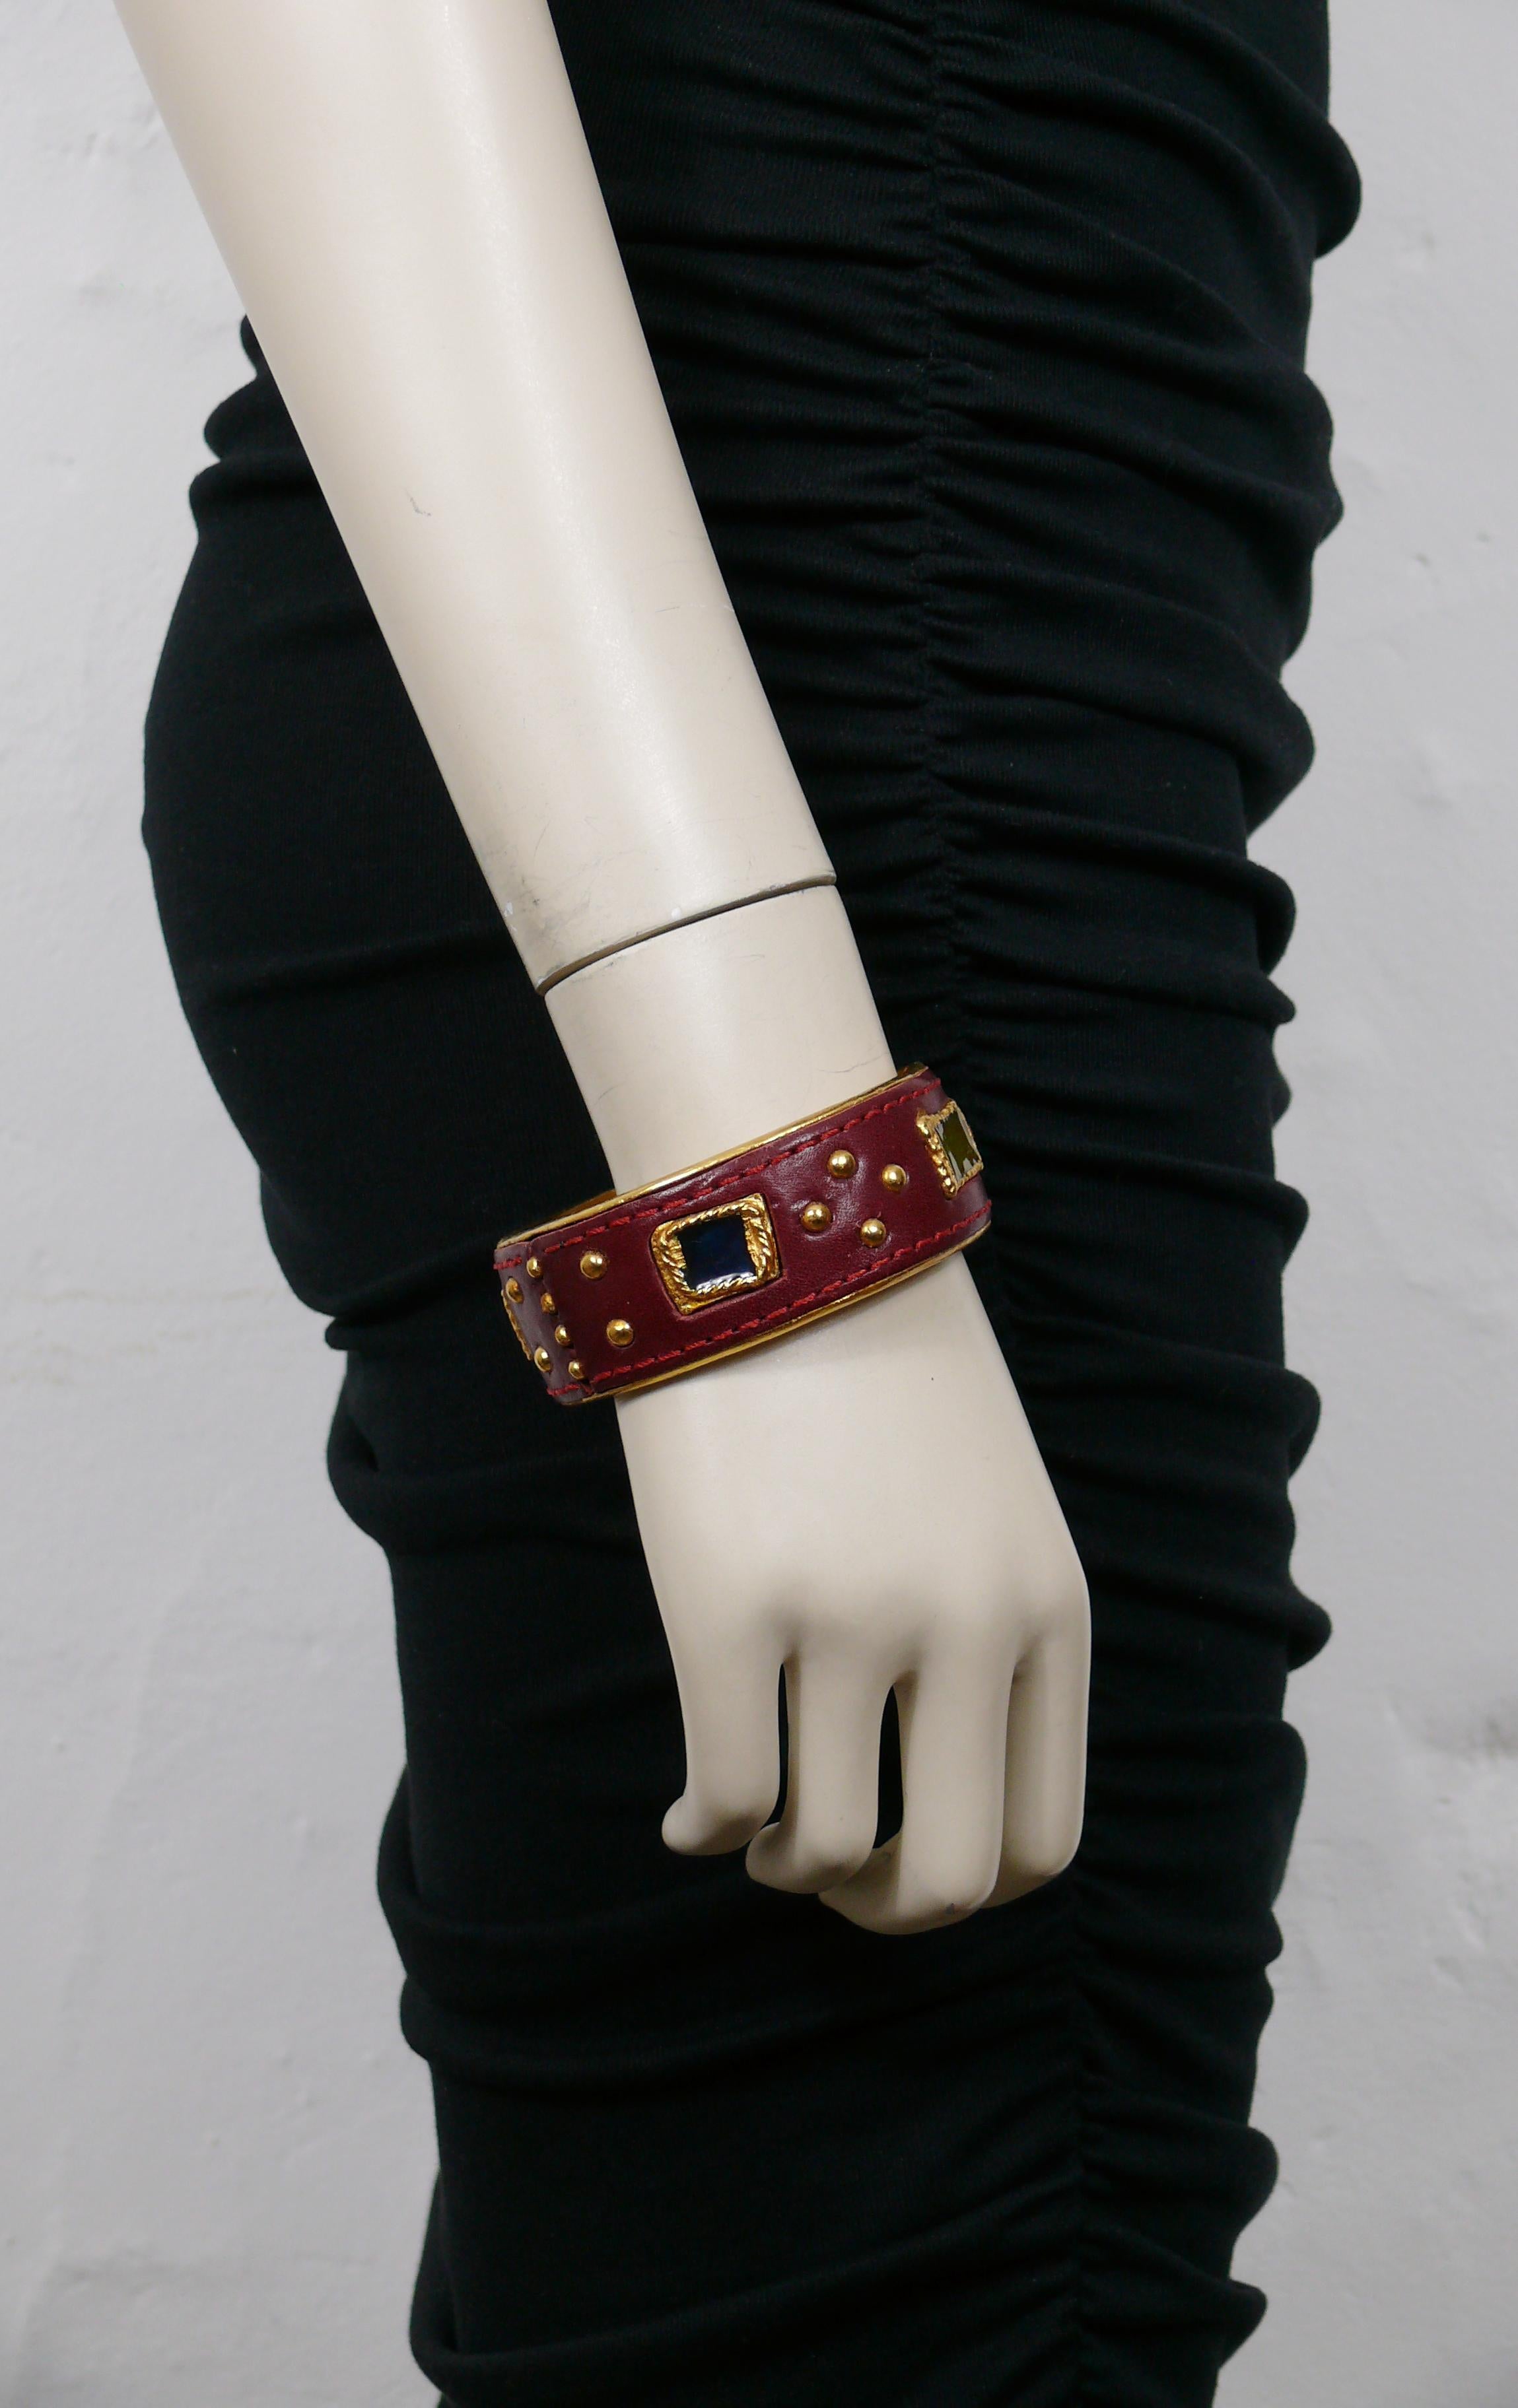 CHRISTIAN LACROIX vintage gold tone bracelet covered with burgundy red color leather with saddle stitch, embellished with studs and poured resin cabochons.

Marked CHRISTIAN LACROIX CL Made in France.

Indicative measurements : inner circumference